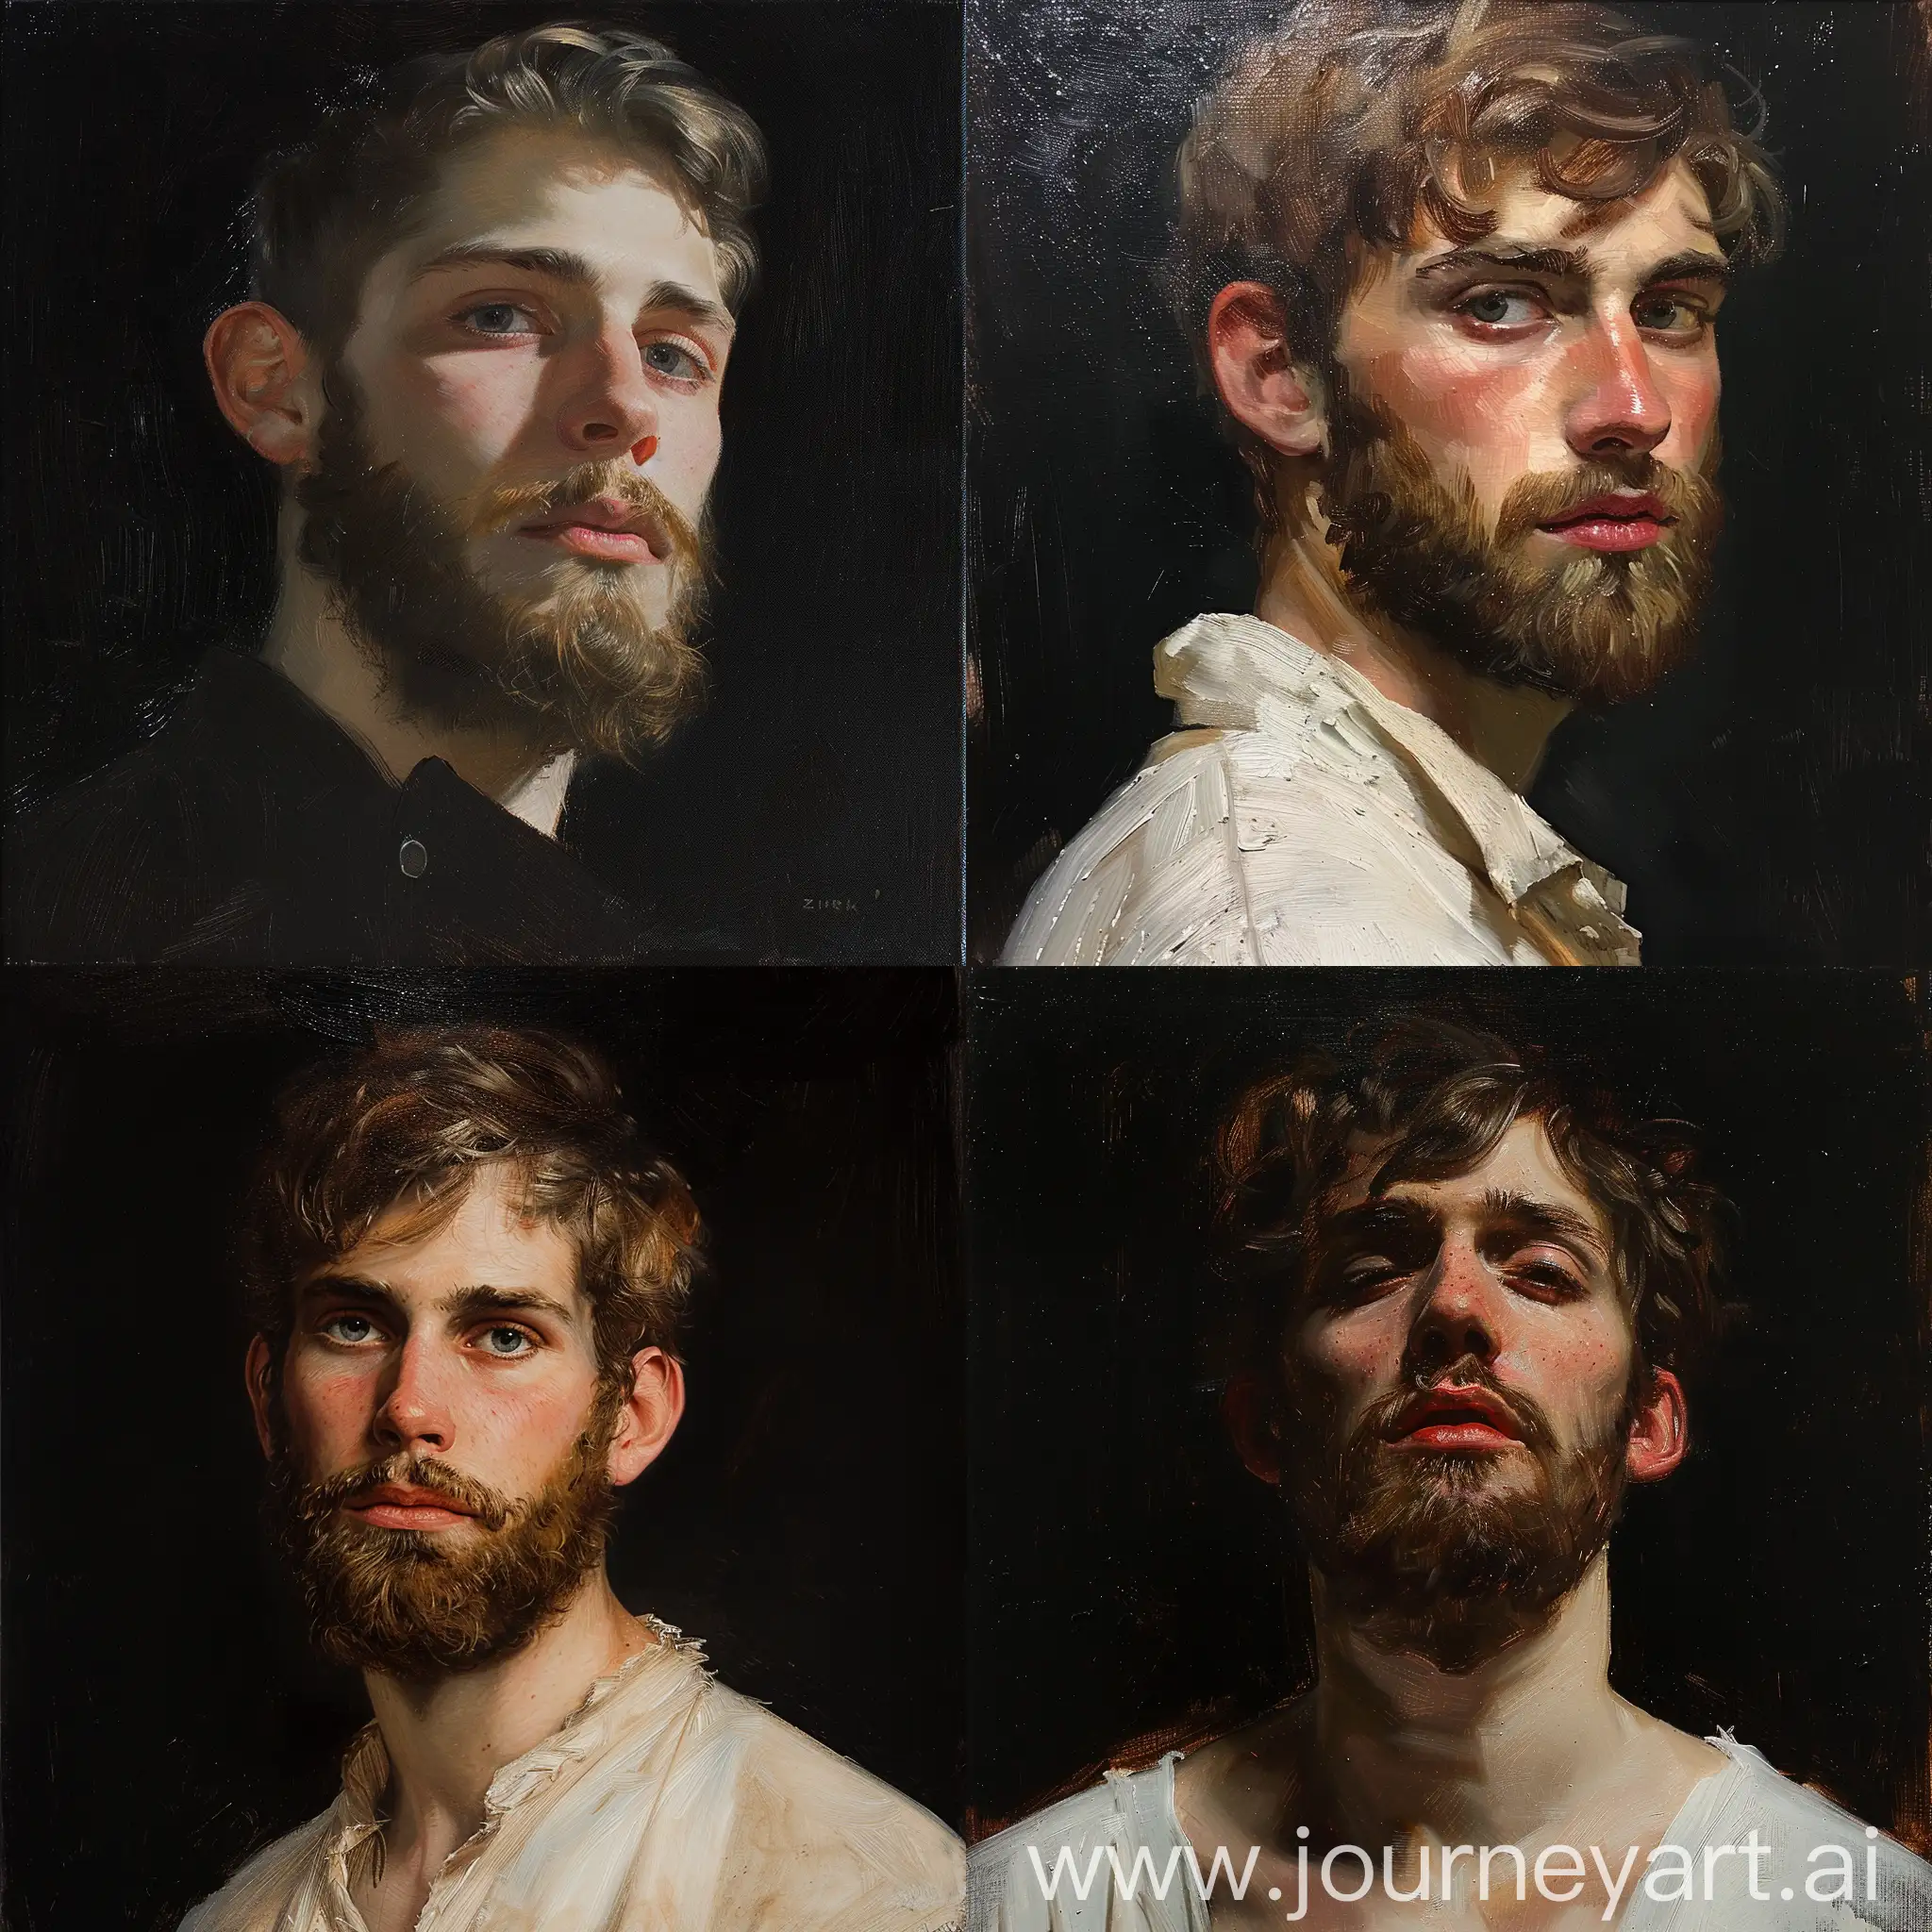 Oil sketch of a young man with beard , wlop John singer Sargent, jeremy lipkin and rob rey, range murata jeremy lipking, John singer Sargent, black background, jeremy lipkin, lensculture portrait awards, casey baugh and james jean, detailed realism in painting, award-winning portrait, amazingly detailed oil painting 